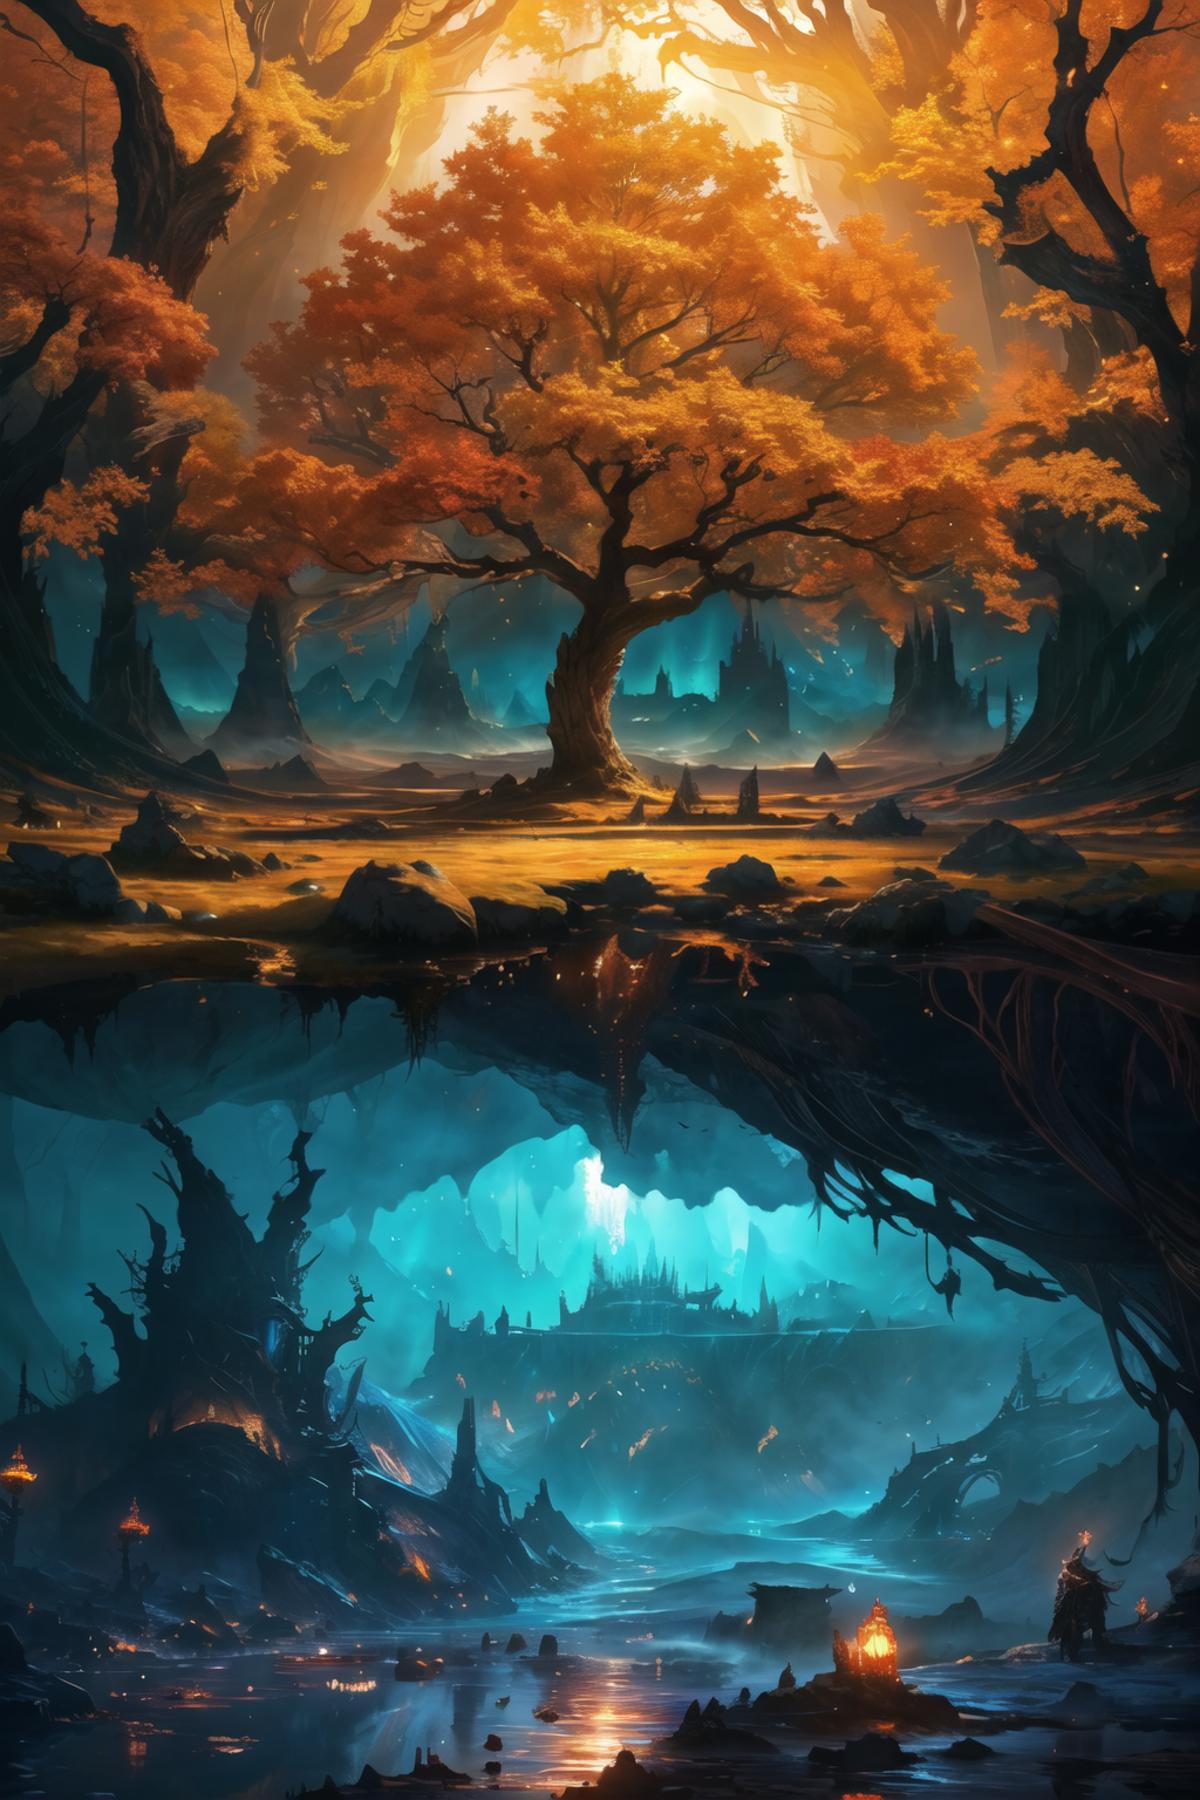 Illustration of a Tree with a Cave underneath it, surrounded by Mountains and a Forest.